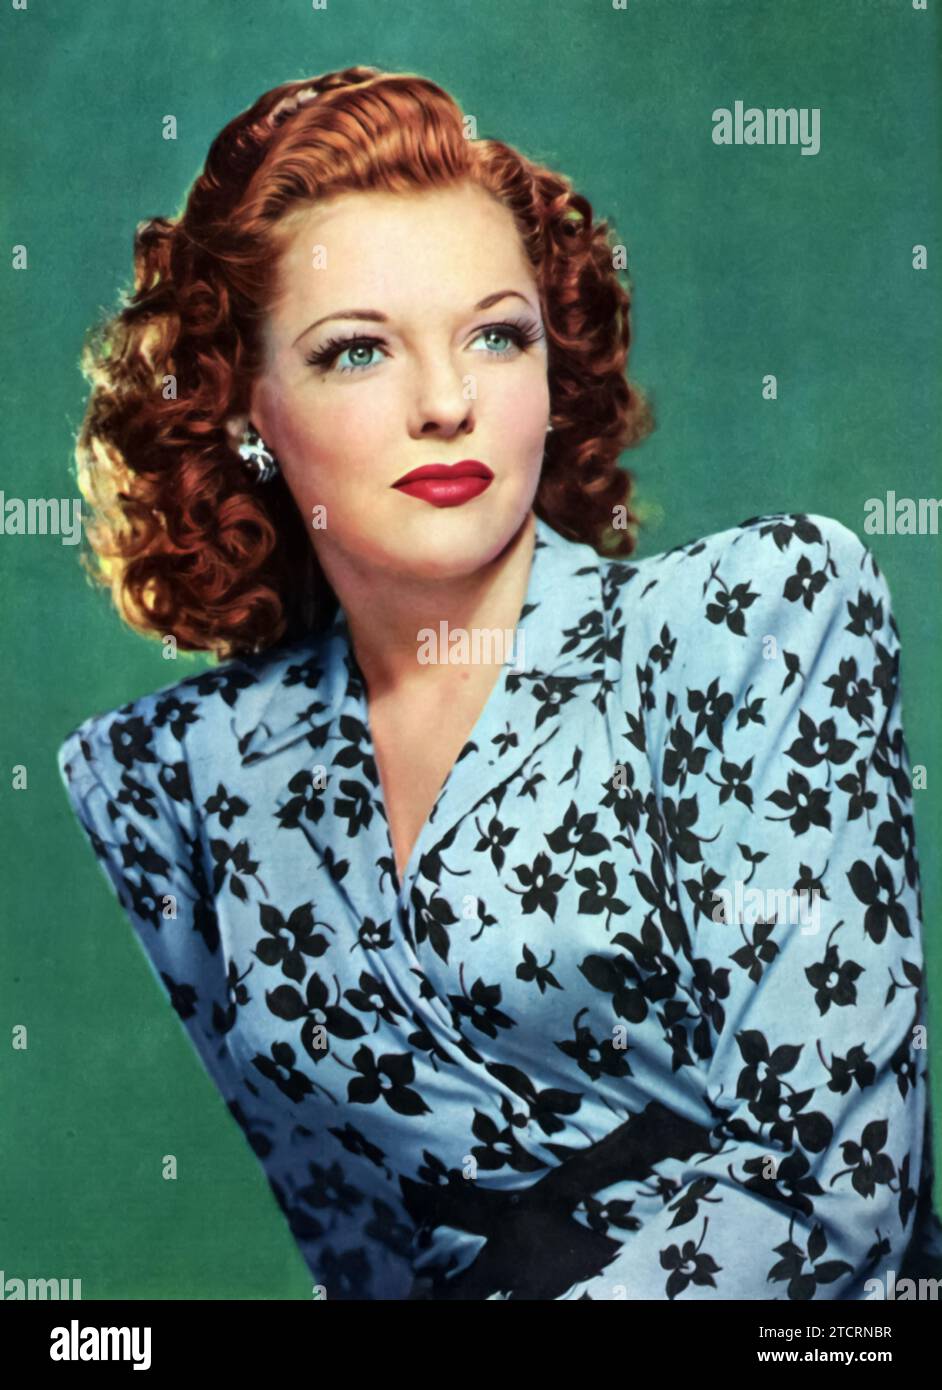 Portrait of Vivian Blaine, a prominent actress best known for her roles in the 1940s (Born on November 21, 1921, and passing away on December 9, 1995). Blaine graced the silver screen with her talent and charisma. With her striking features and undeniable presence, she became a notable figure in Hollywood. Among her renowned performances, she's remembered for her role in 'Guys and Dolls' where she played Miss Adelaide, showcasing her versatility as both a singer and an actress. Stock Photo